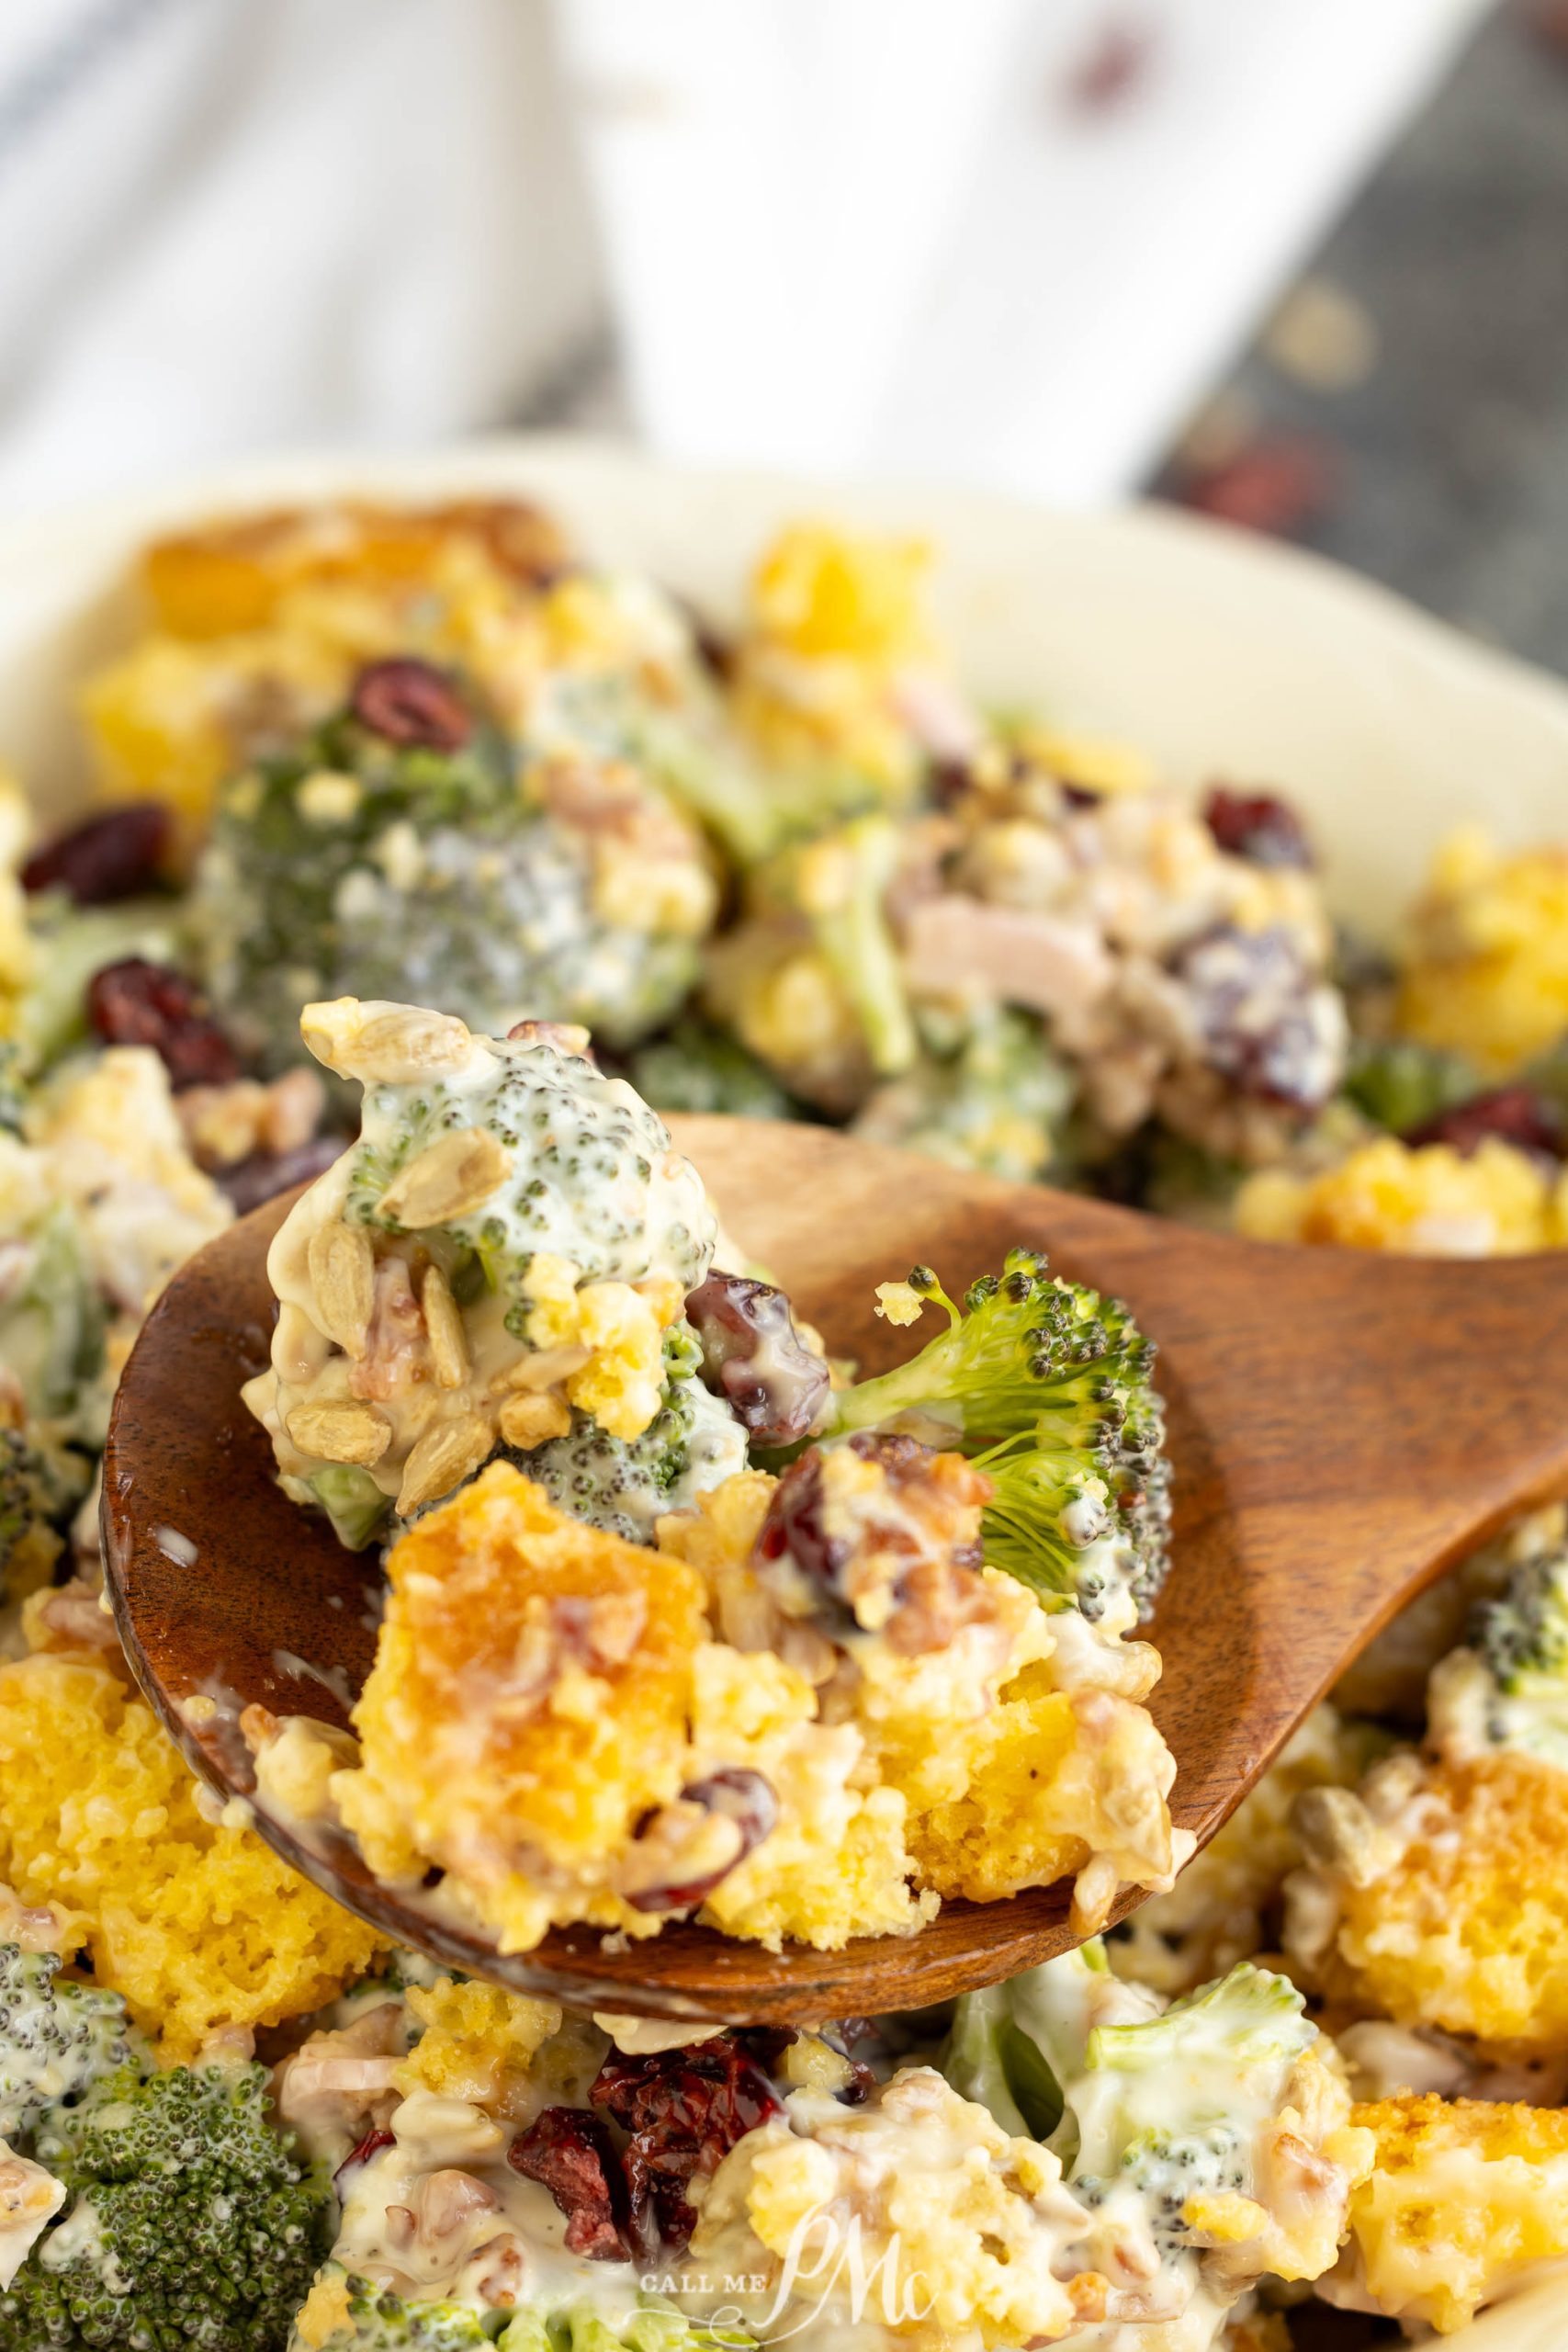 A wooden spoon scooping a colorful broccoli salad with cornbread, cranberries, and a creamy dressing from a white dish.